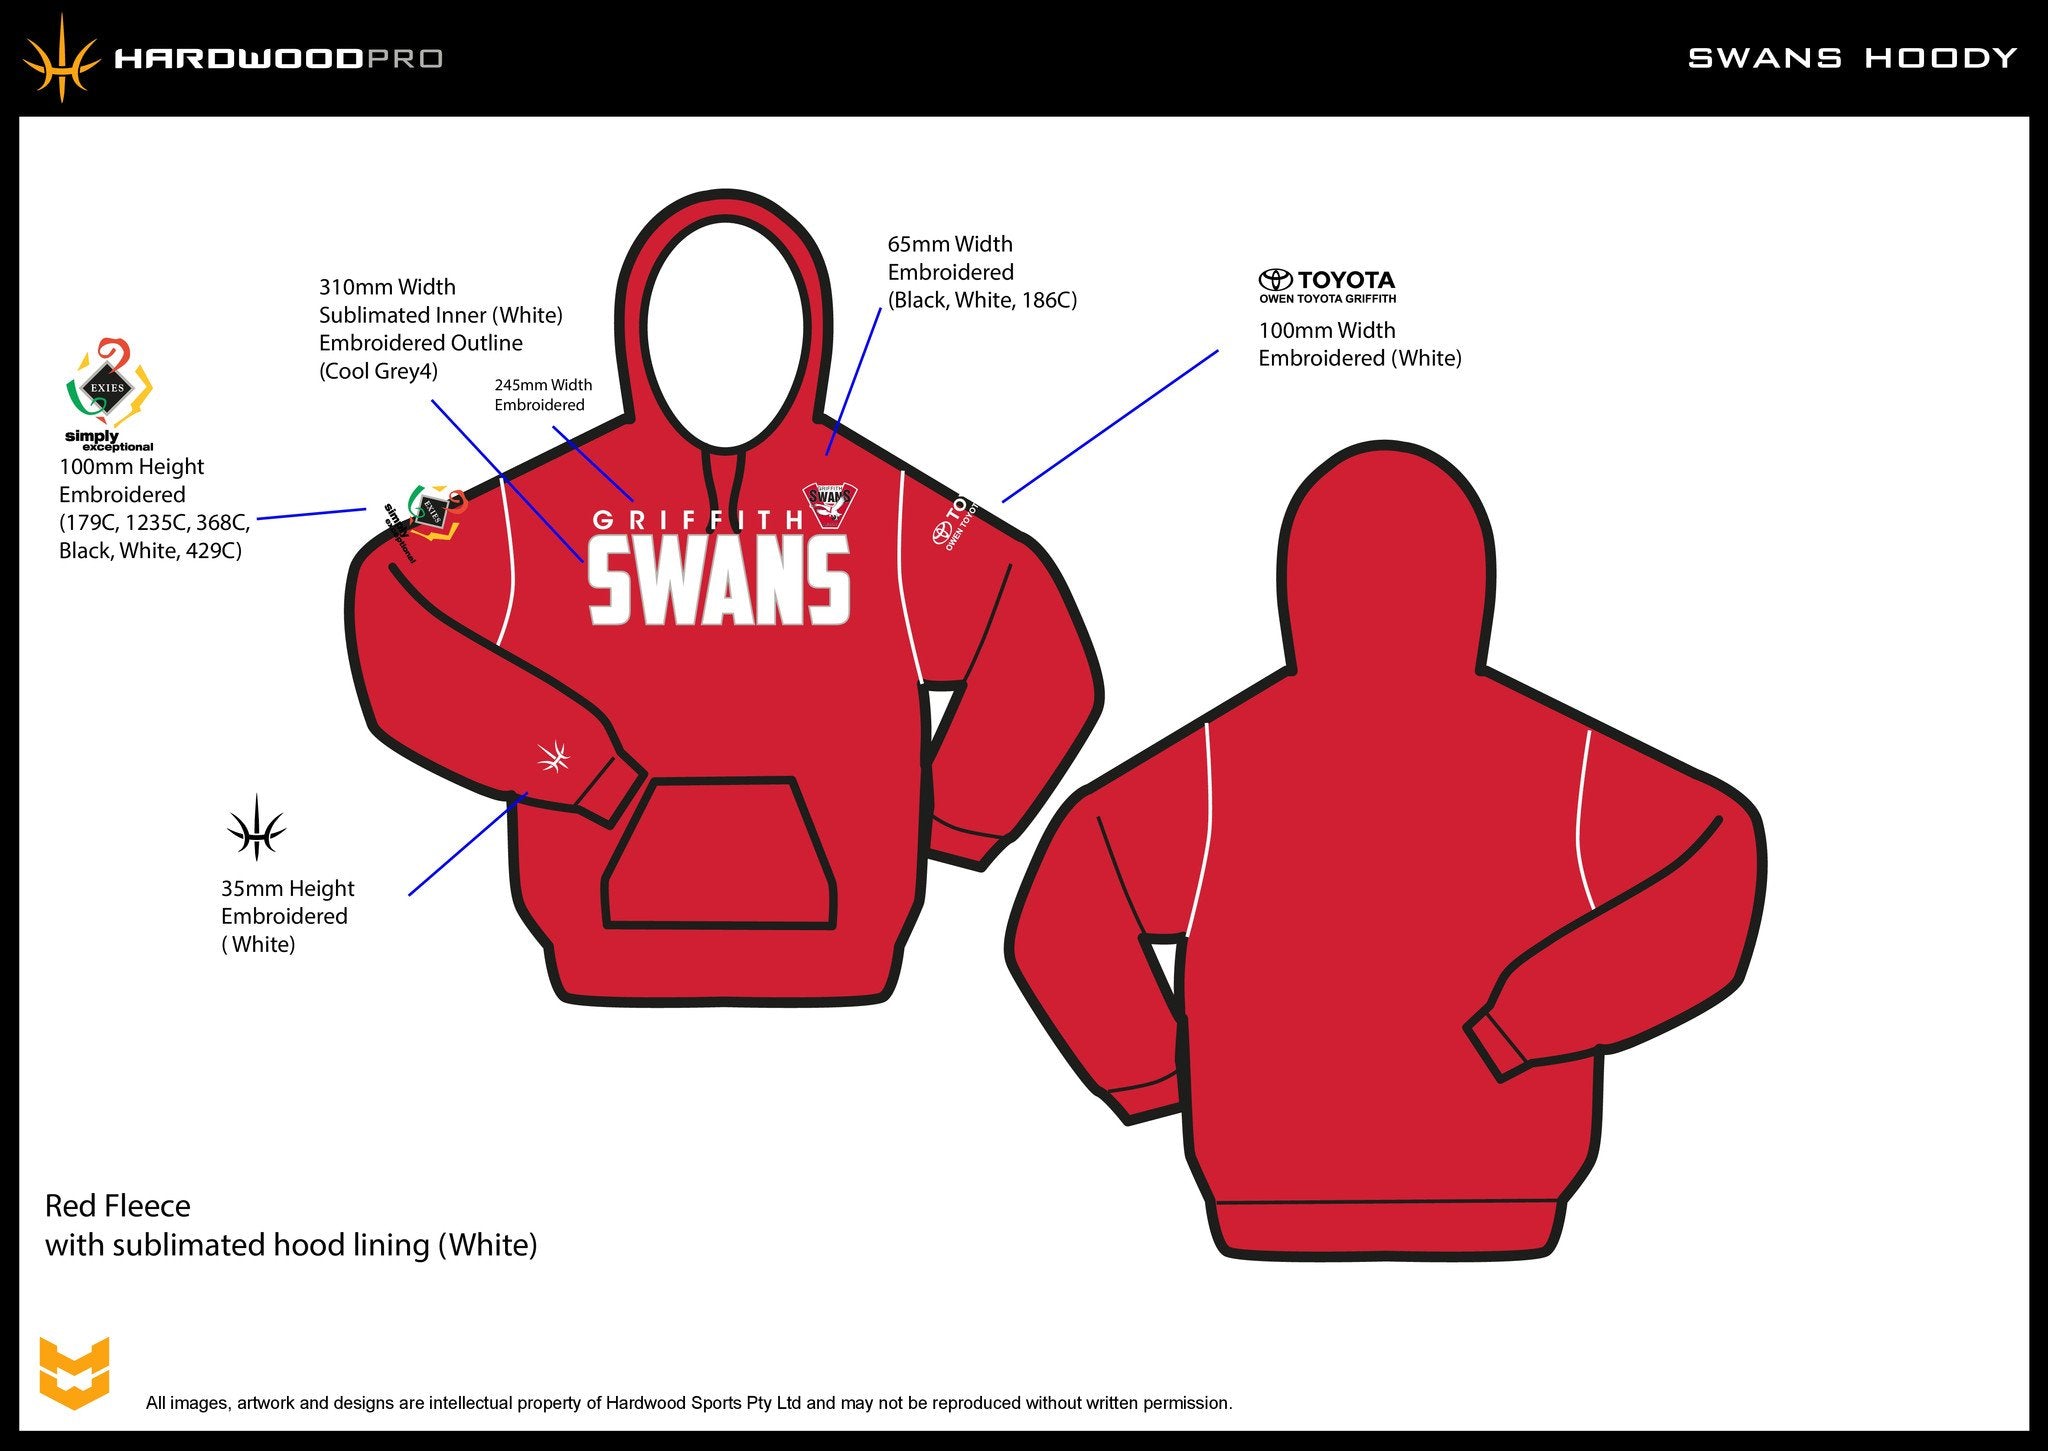 Griffith Swans Hoodie